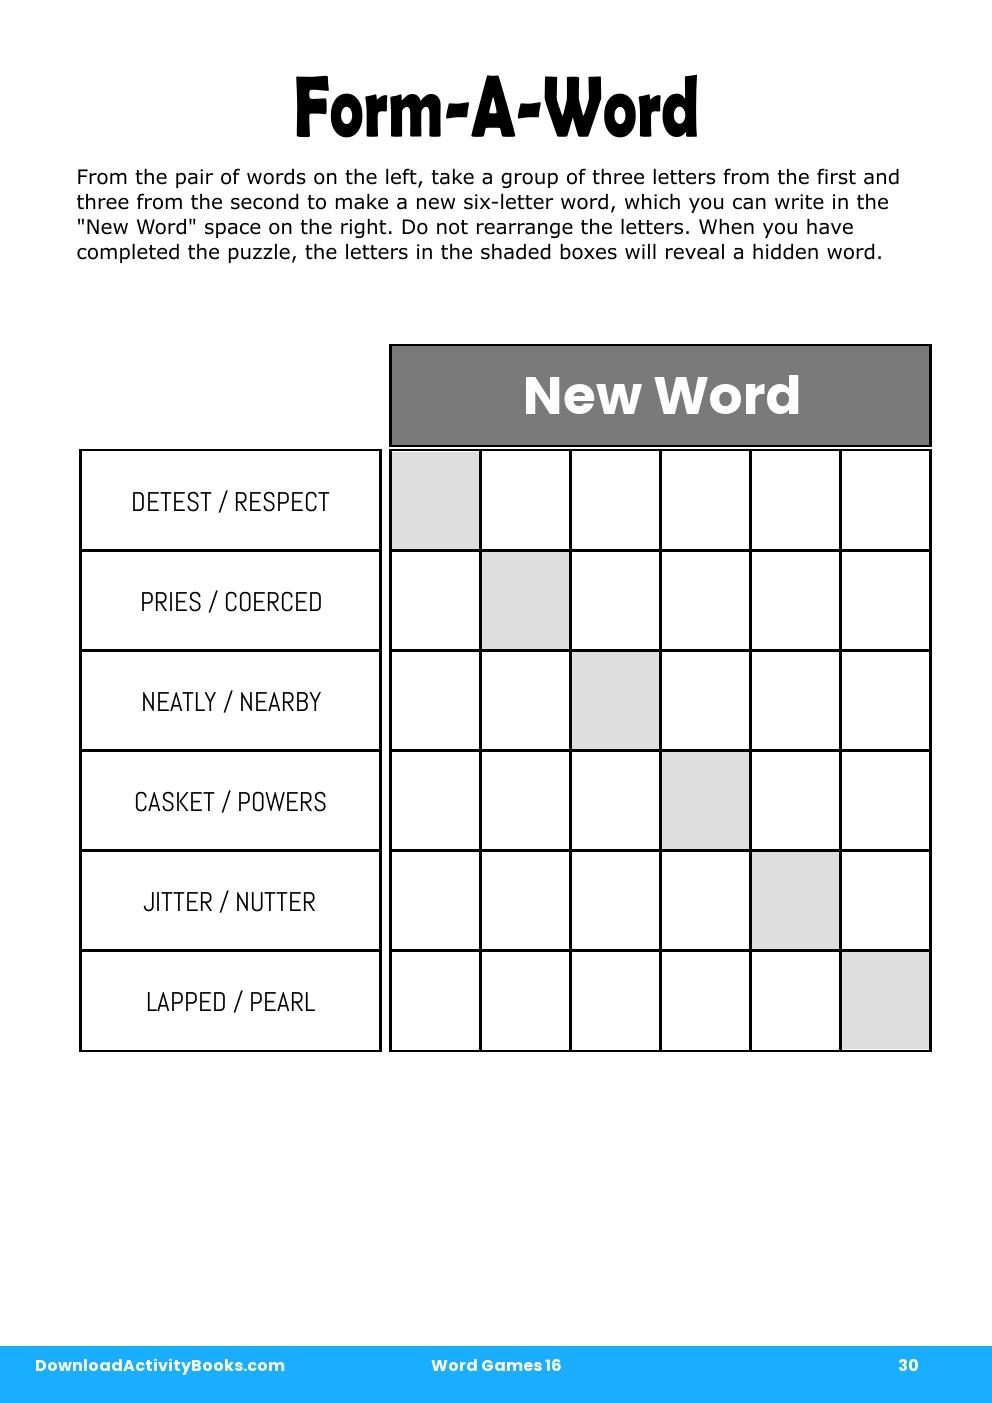 Form-A-Word in Word Games 16